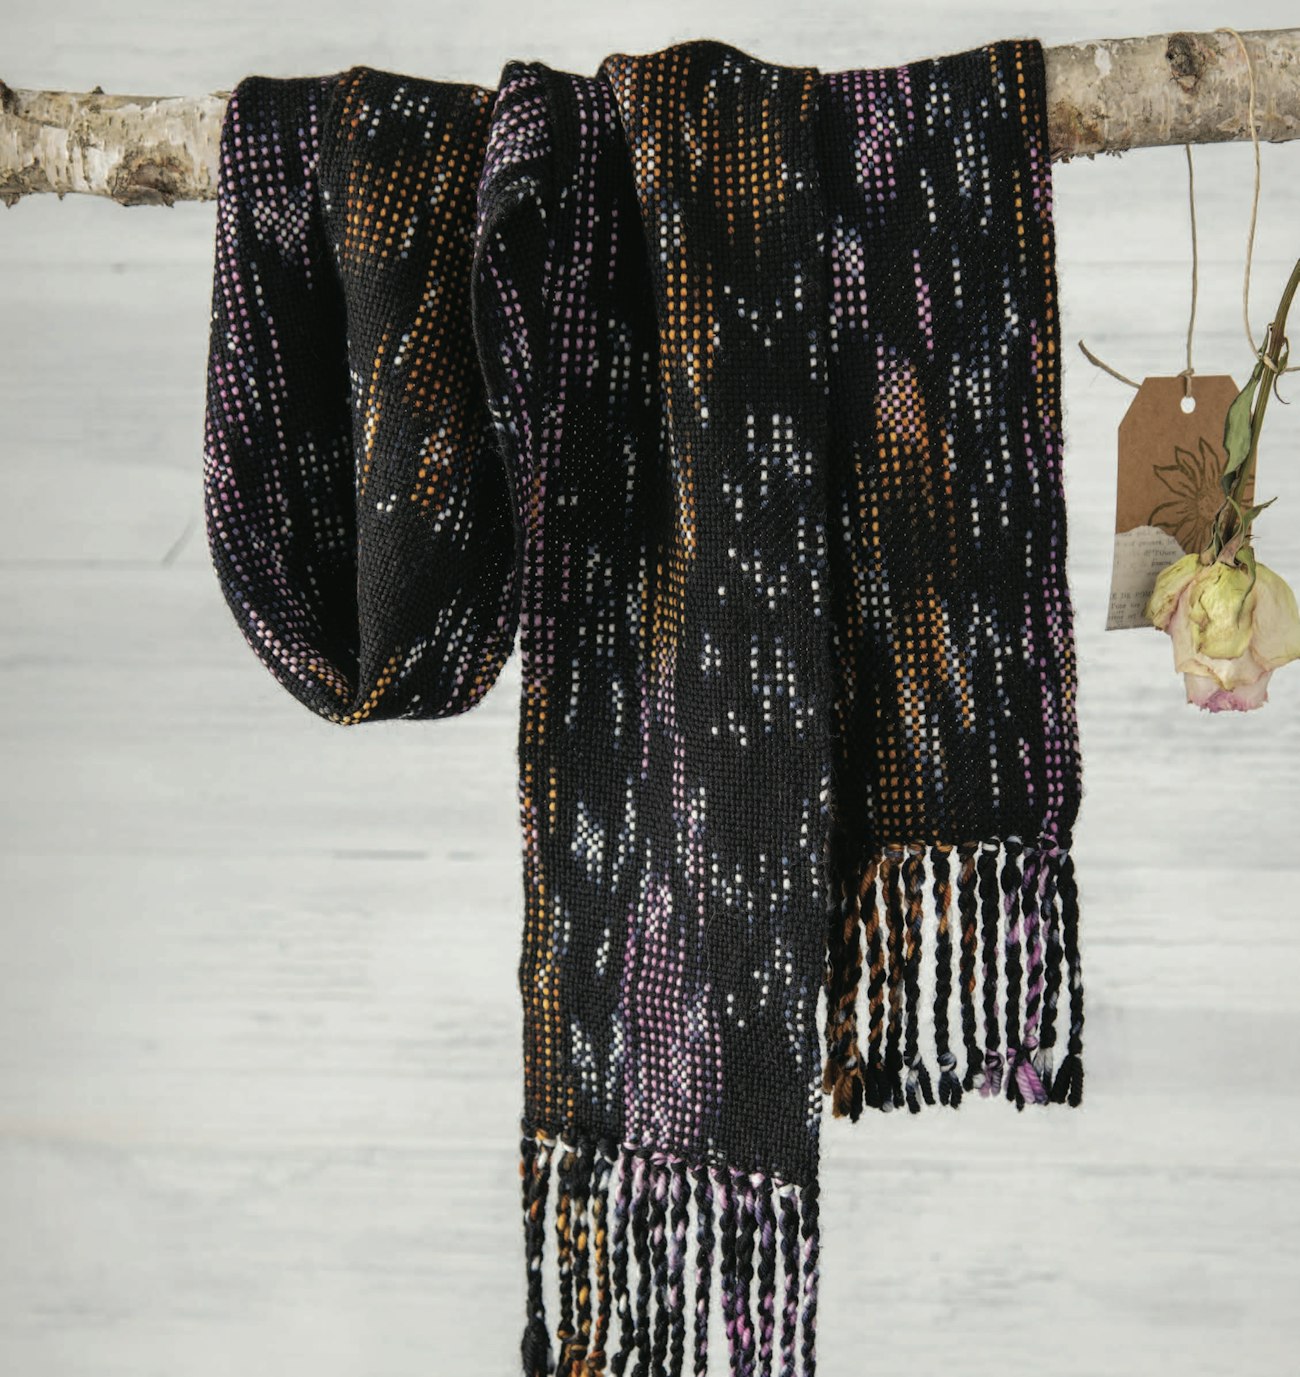 Palindrome Scarf by Judith Shangold